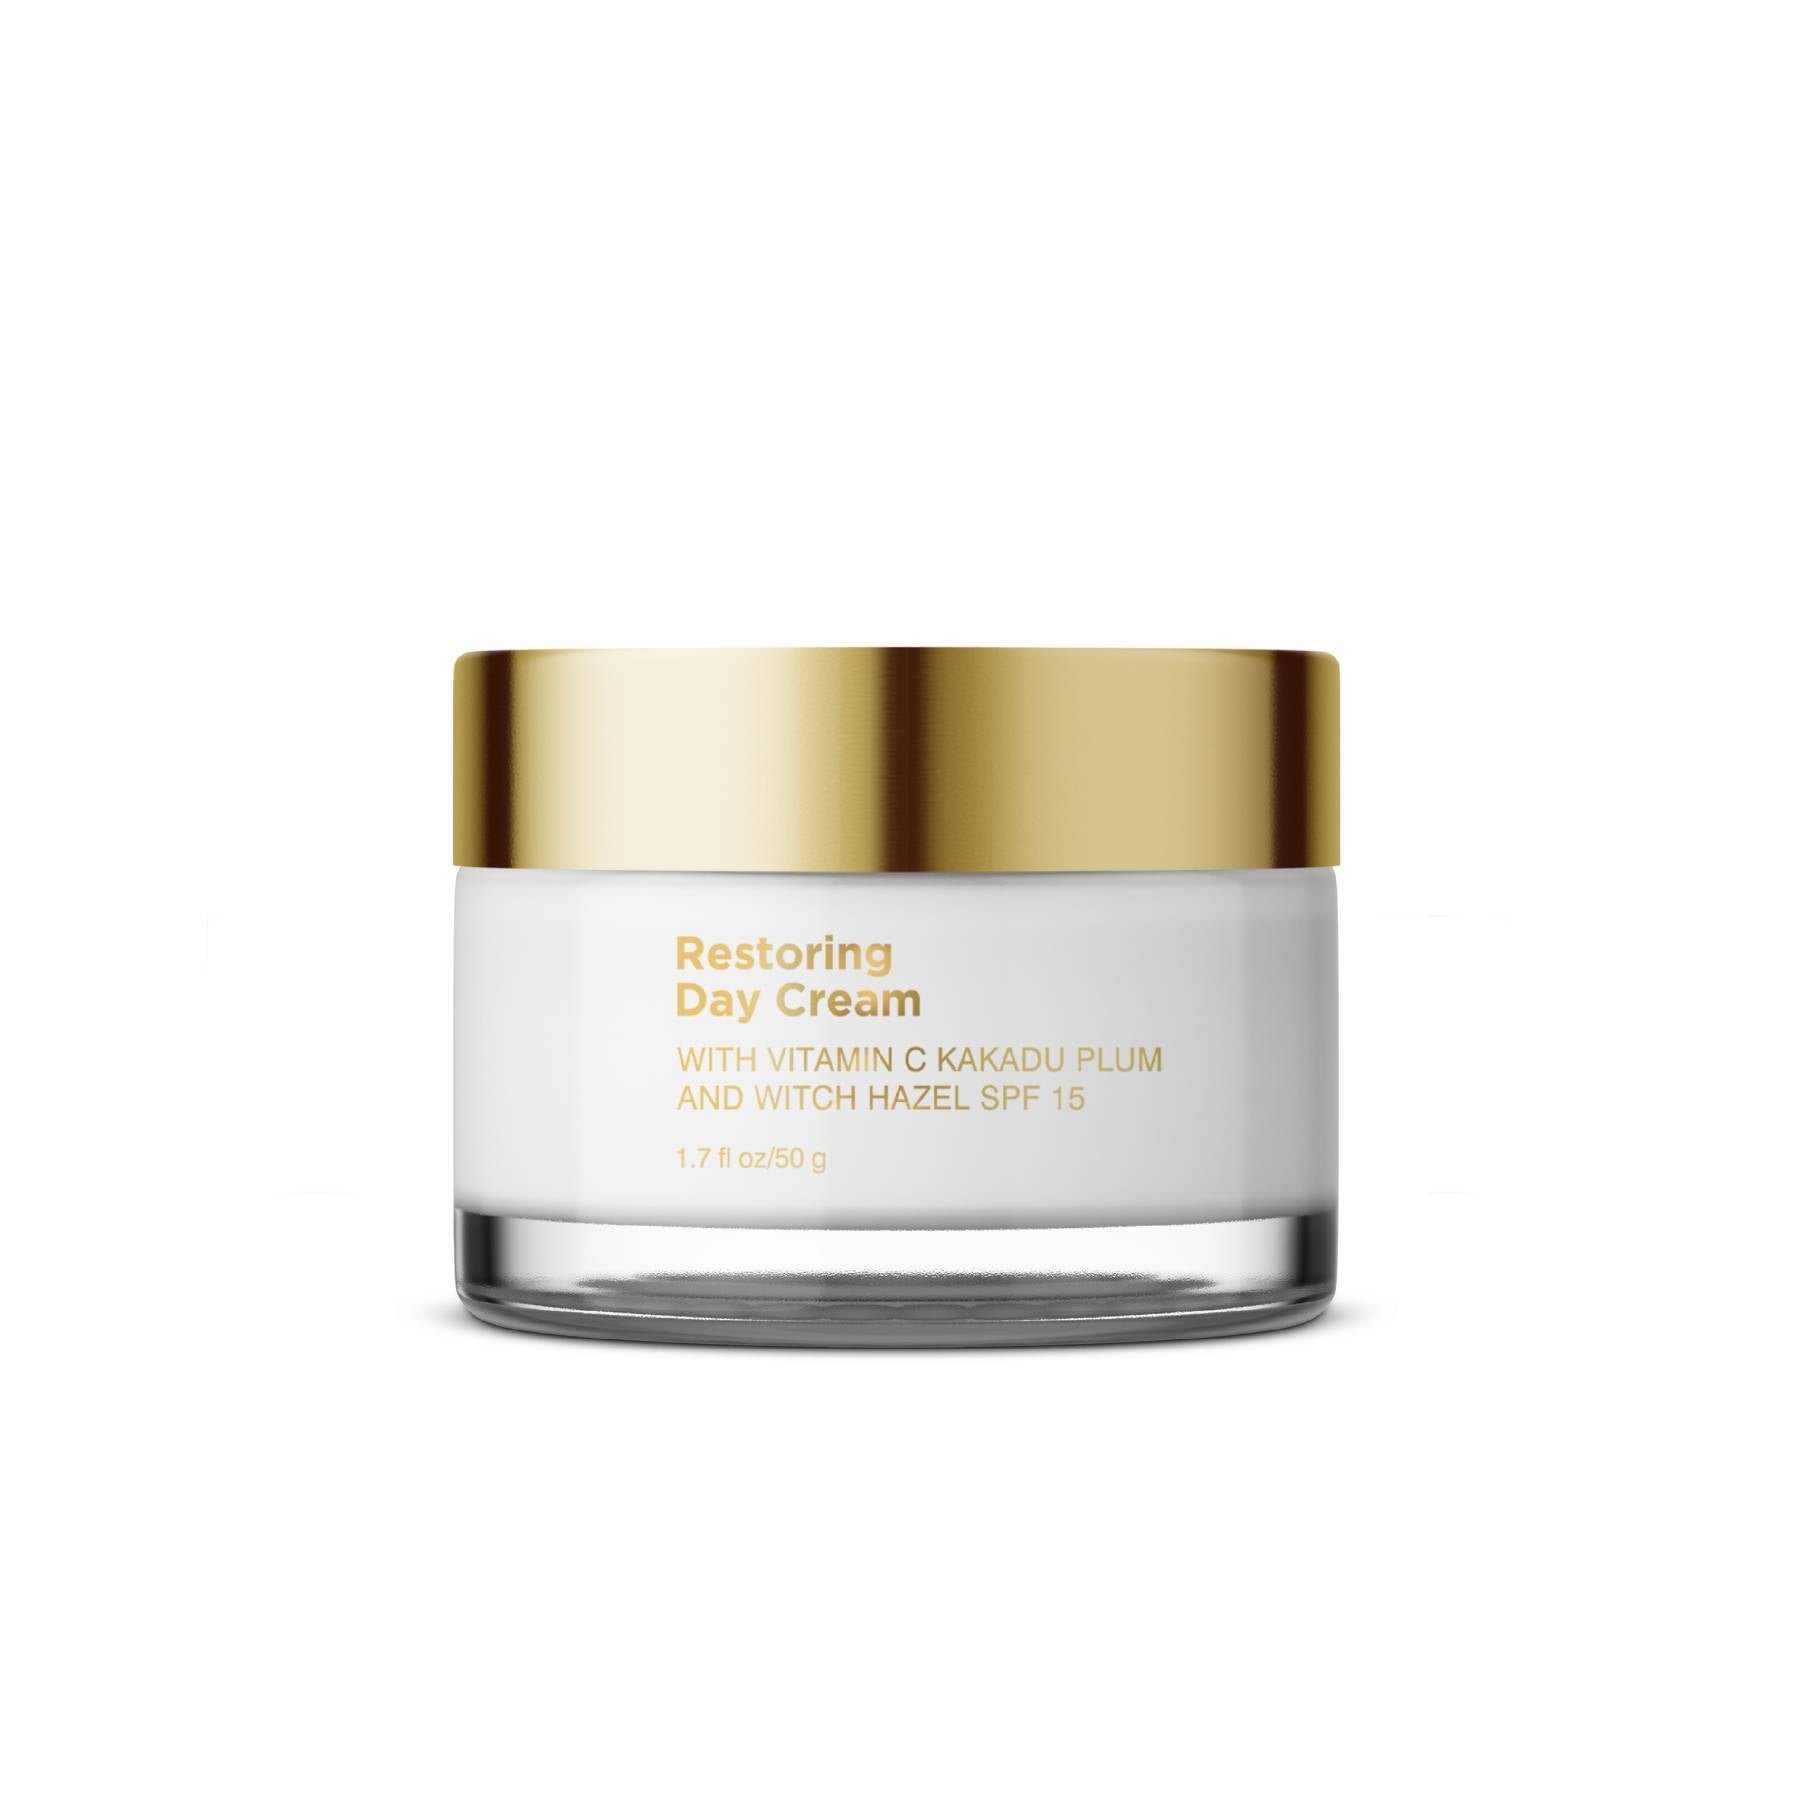 Shop Restoring Day Cream  from Coccoon on SublimeLife.in. Best for protecting your skin and is ant-aging.